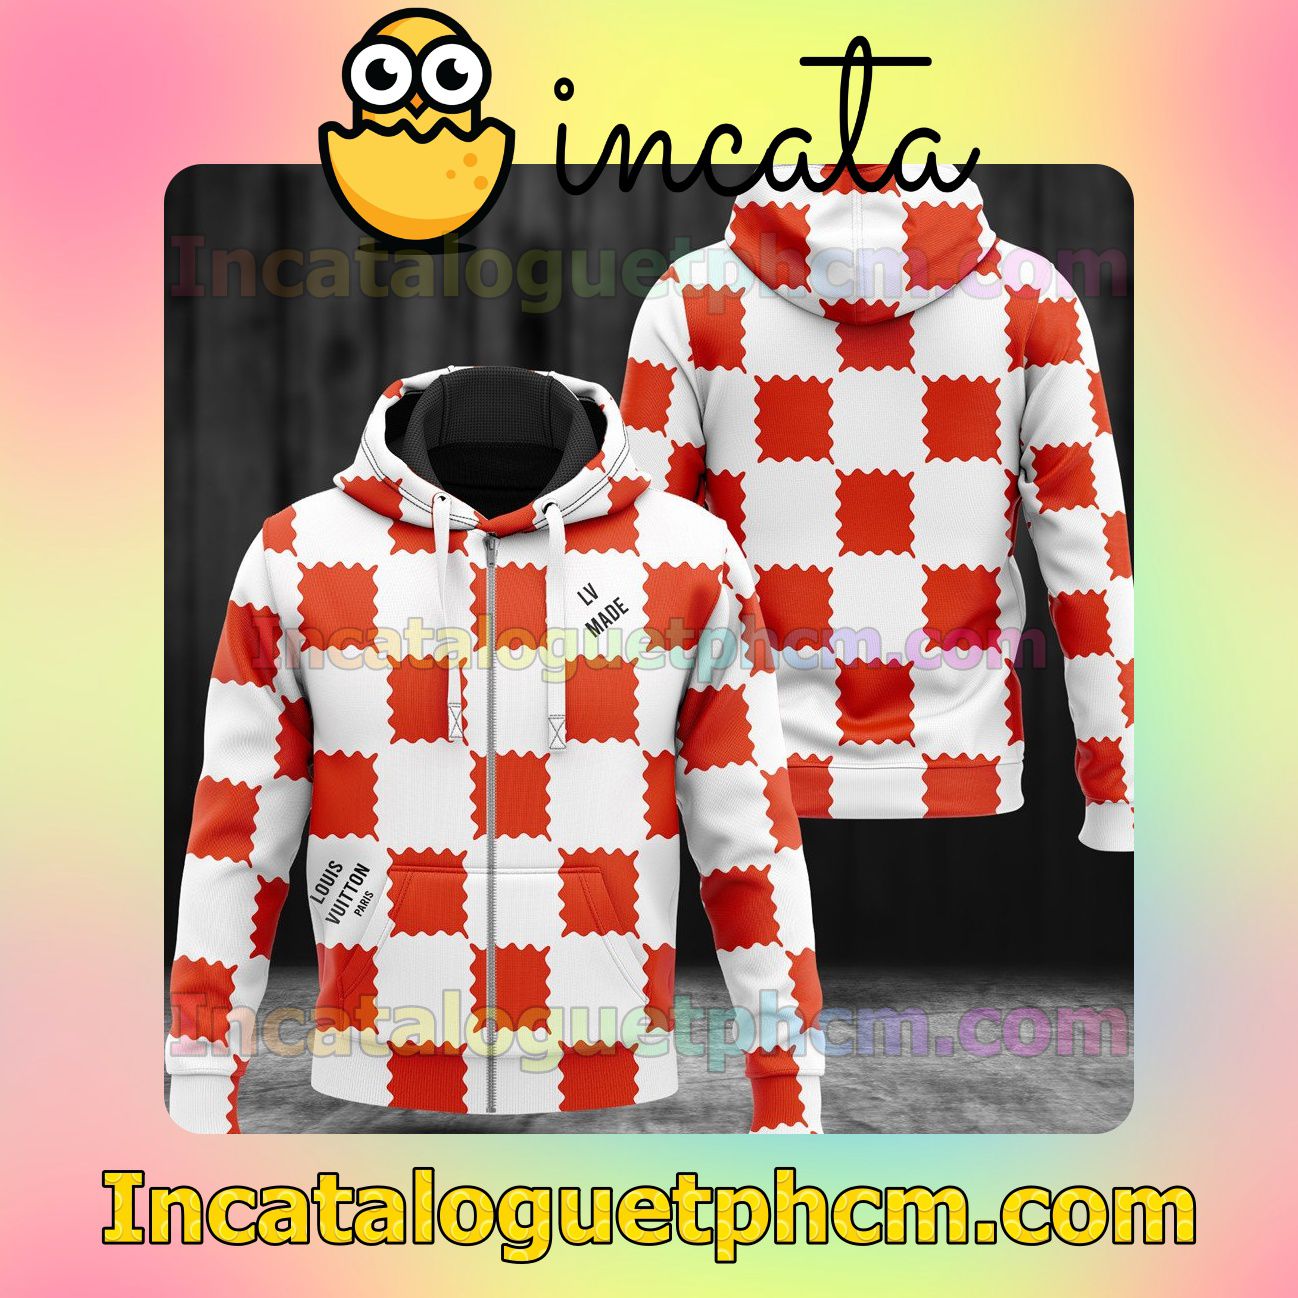 Print On Demand Louis Vuitton Paris Lv Made Red White Checkered Long Sleeve Jacket Mens Hoodie